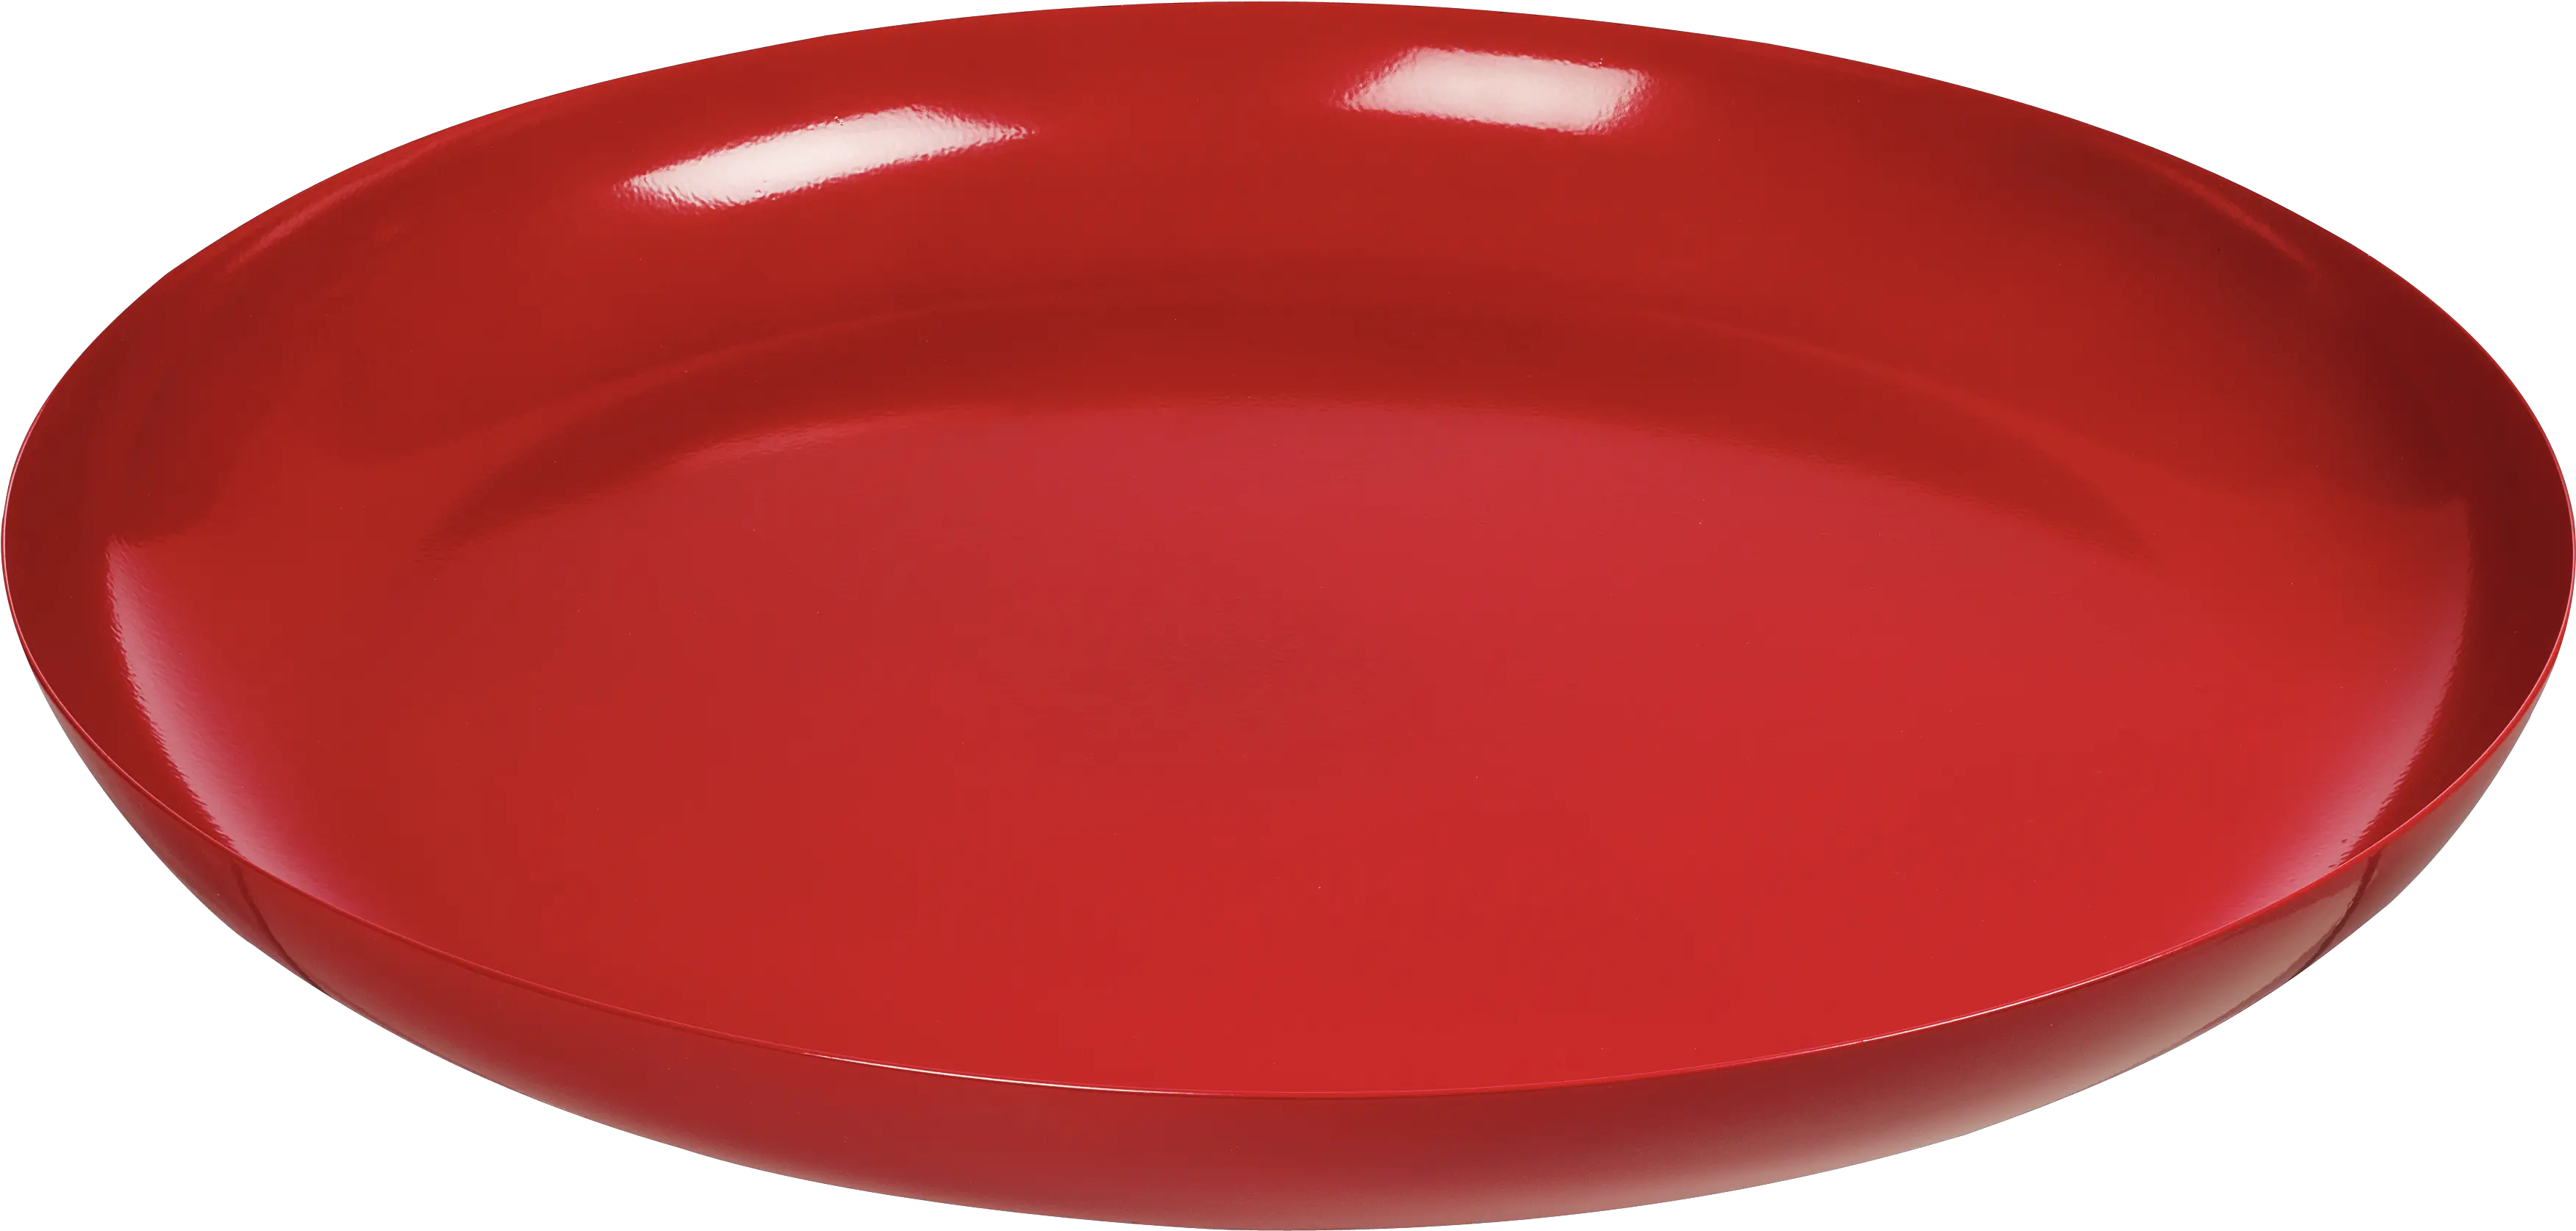 Red Plate Png Image Plate Png Plate Png